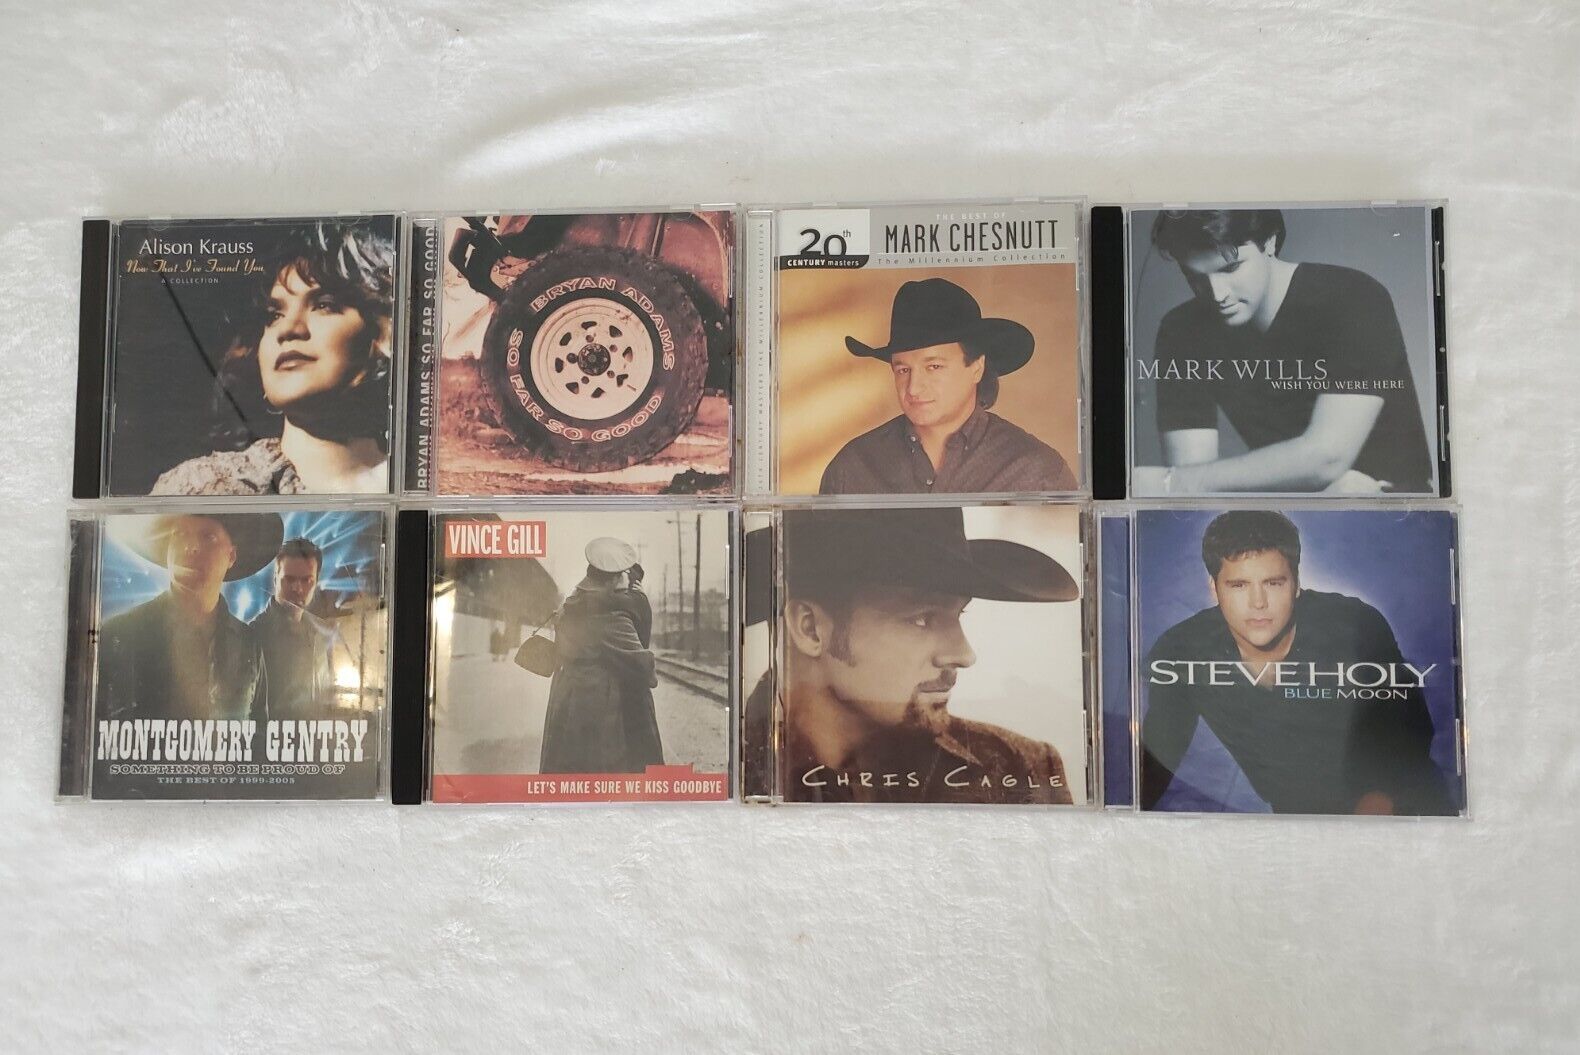 Lot Of 8 Country Music CDs Chris Cagle Vince Gill Mark Willis Alison Krauss More